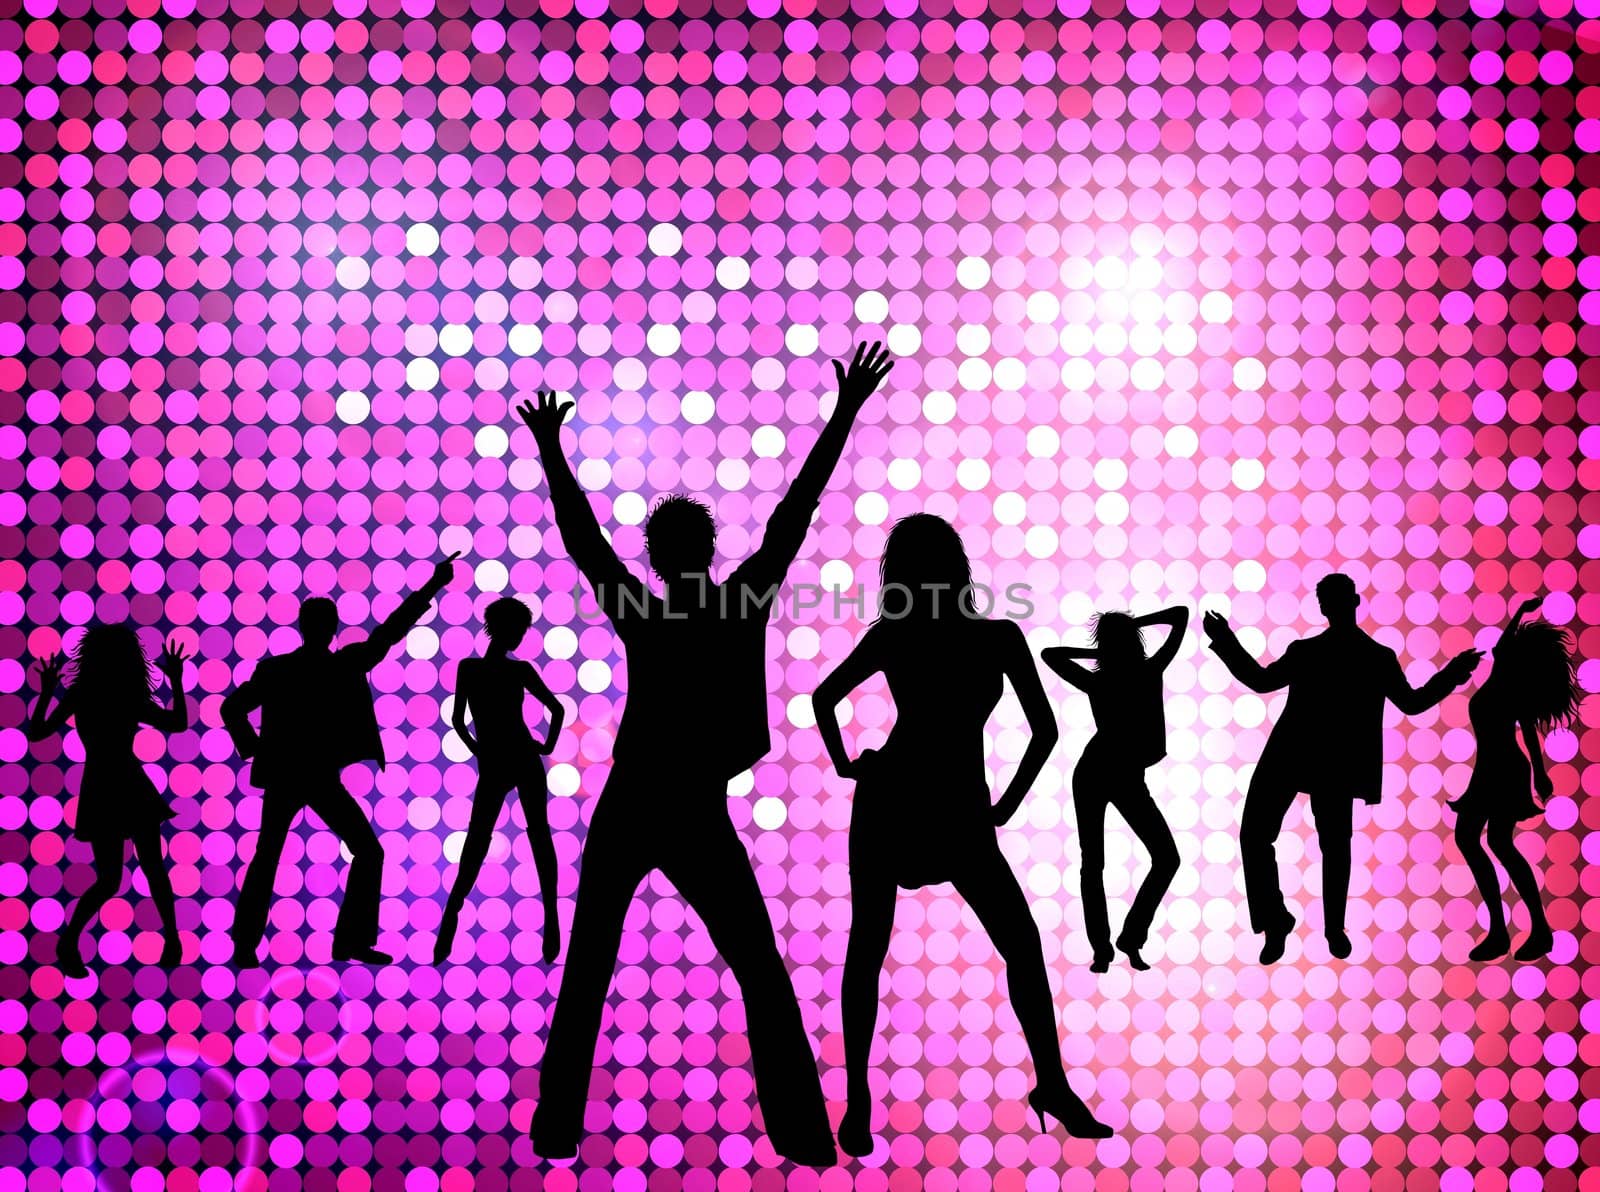 Disco - dancing young people by peromarketing